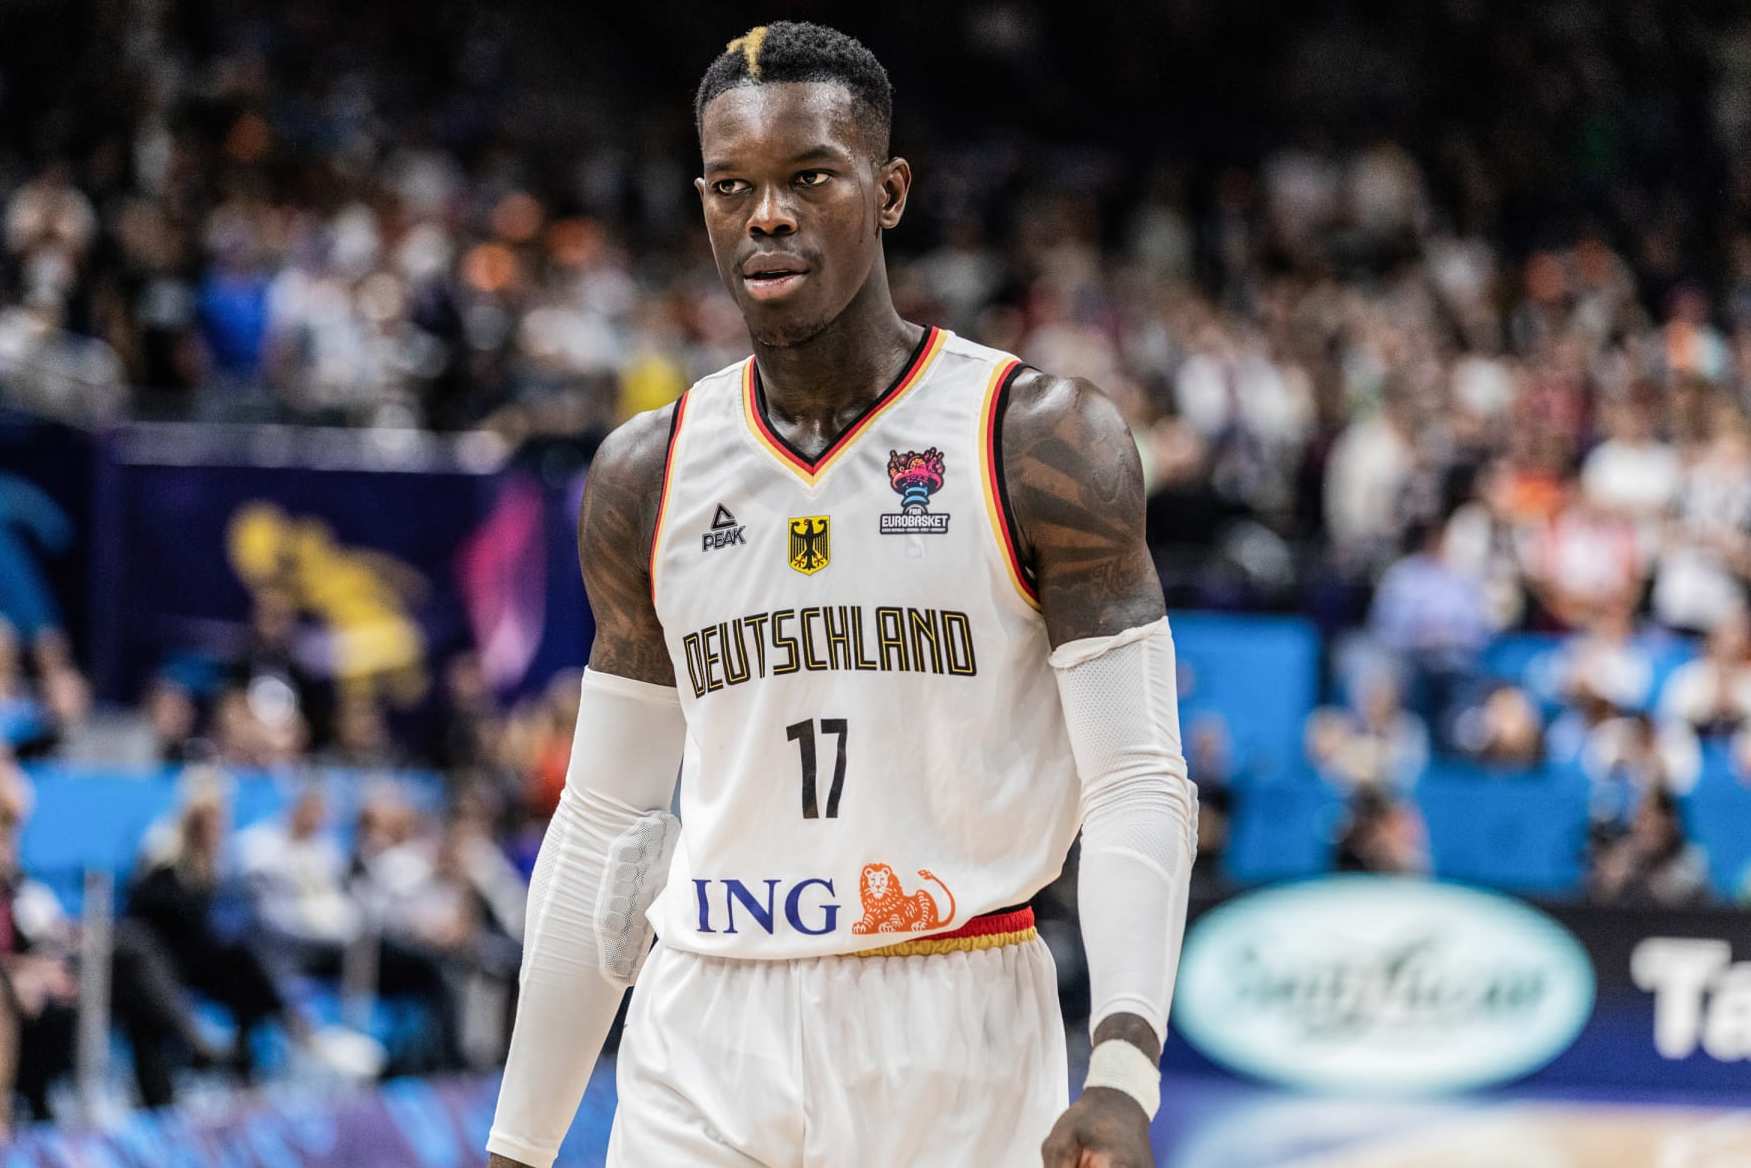 Dennis Schroder goes for 38 PTS against the Bucks 😳 